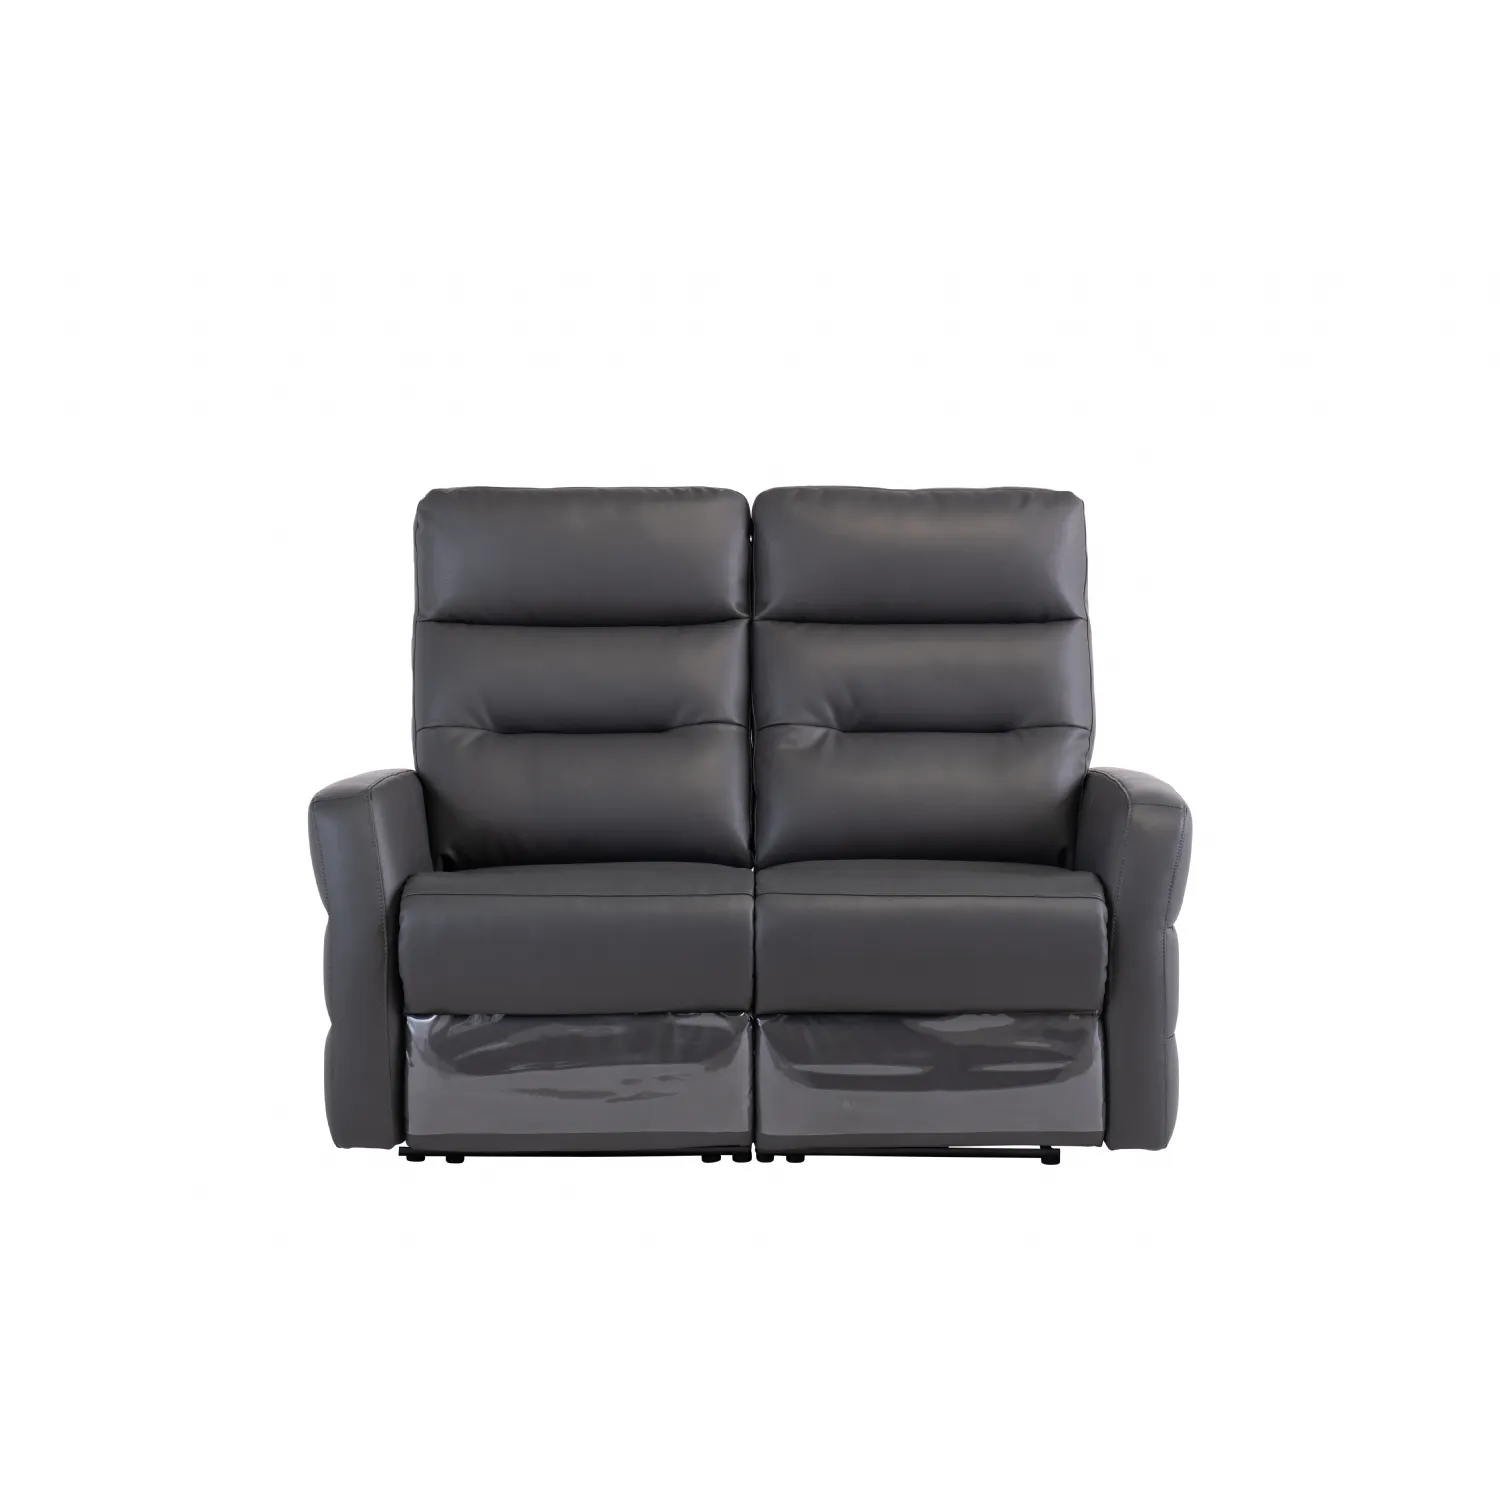 Charcoal Grey Leather Electric Recliner 2 Seat Sofa